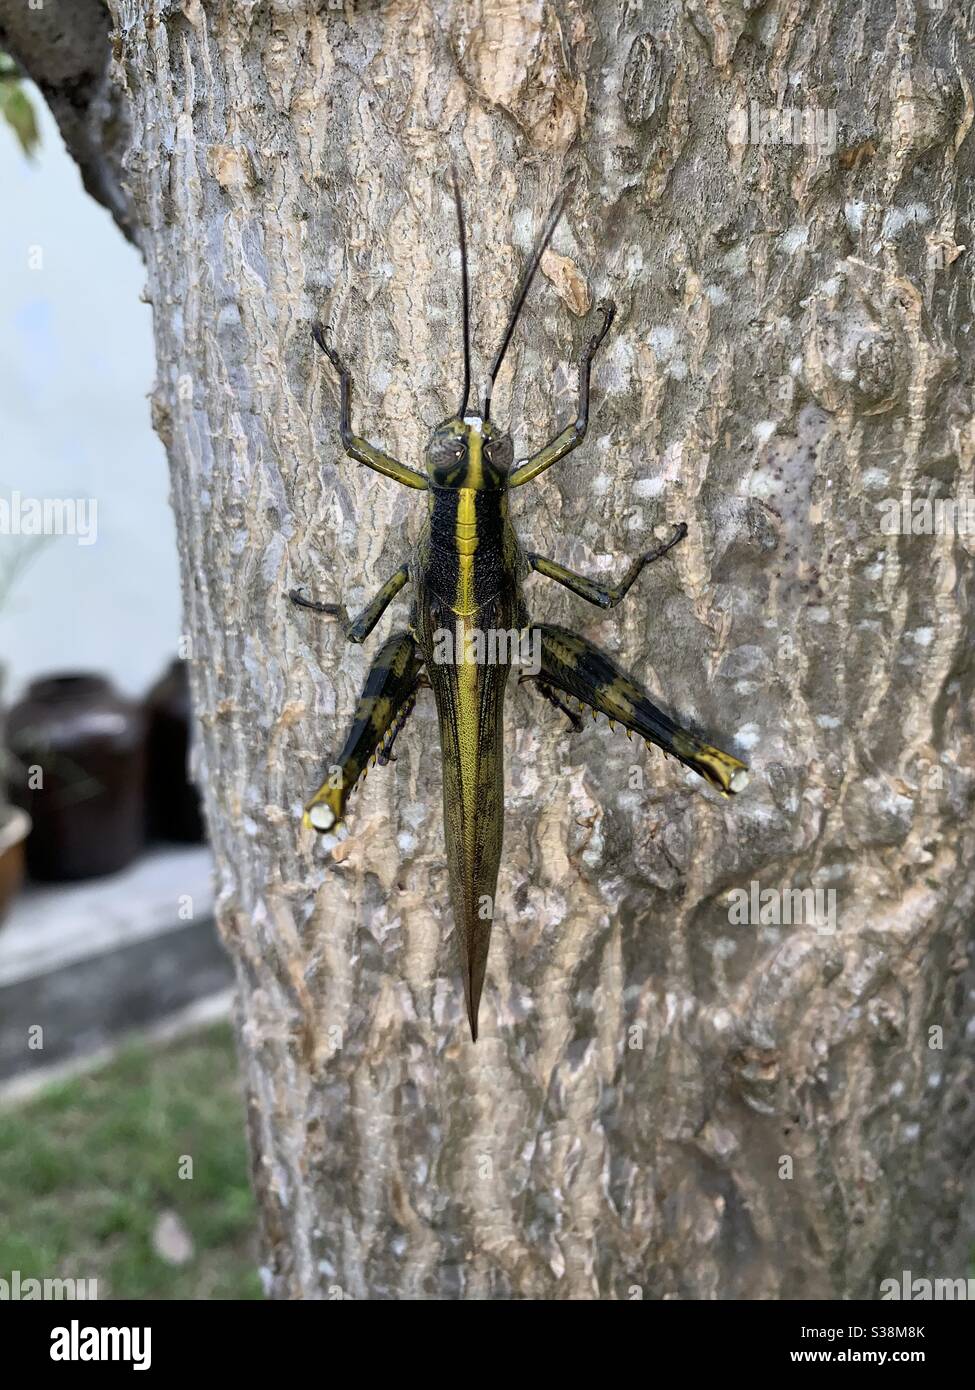 A locusts (short-horned grasshoppers) in the trunk of a moringa (malunggay) tree.It’s a scary thing for me. Stock Photo